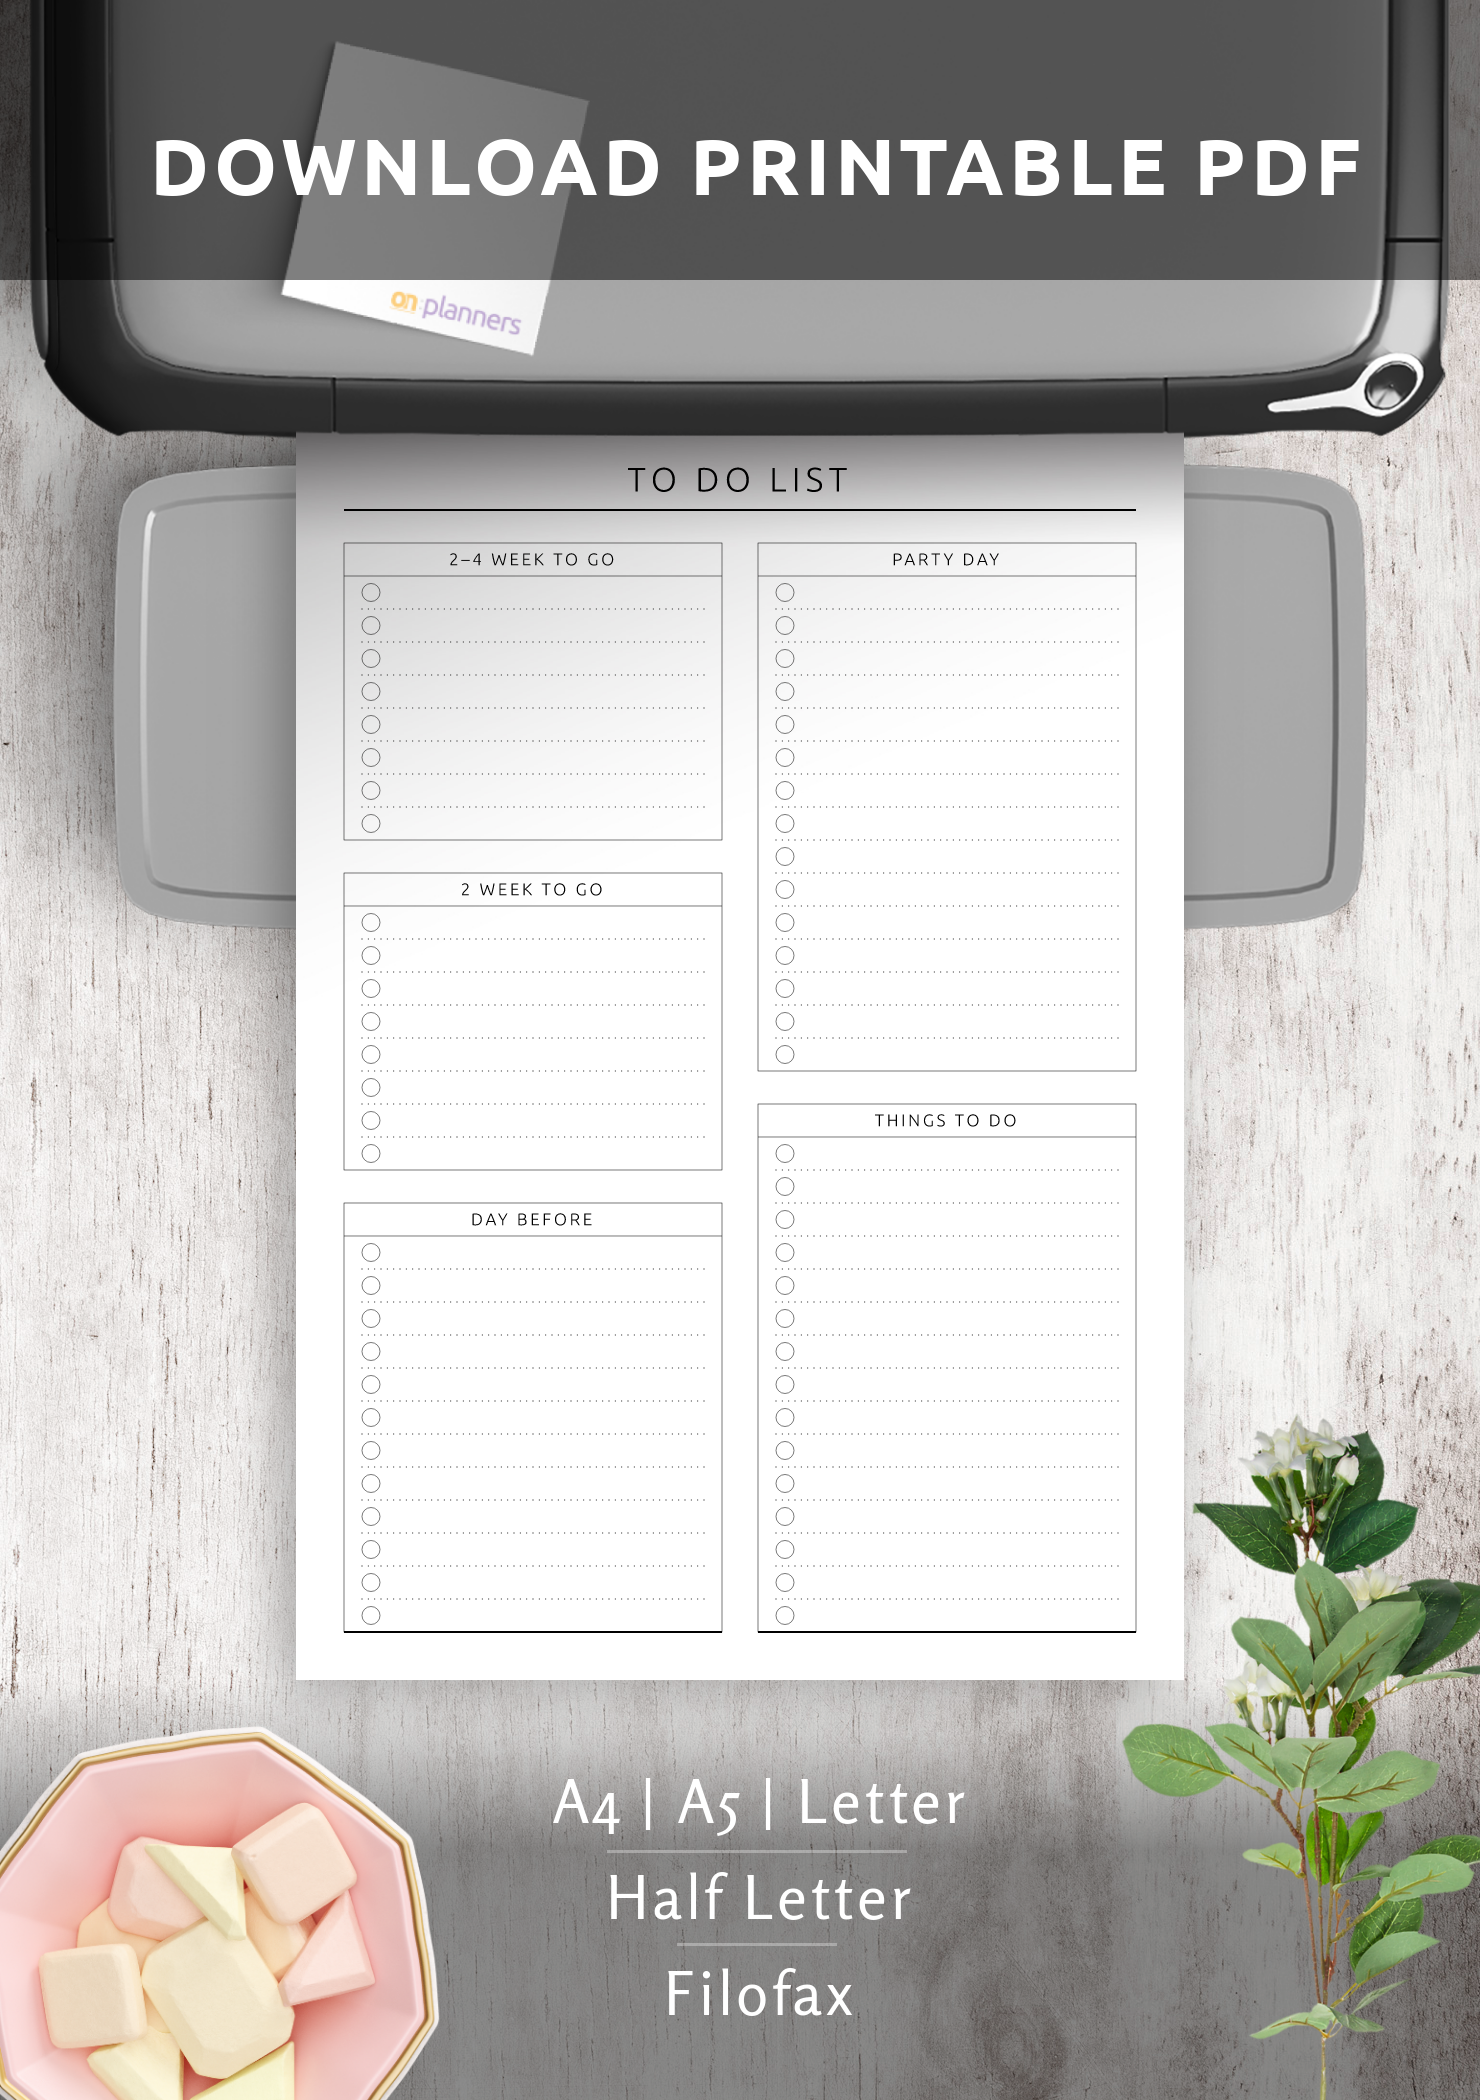 download printable party to do list original style pdf